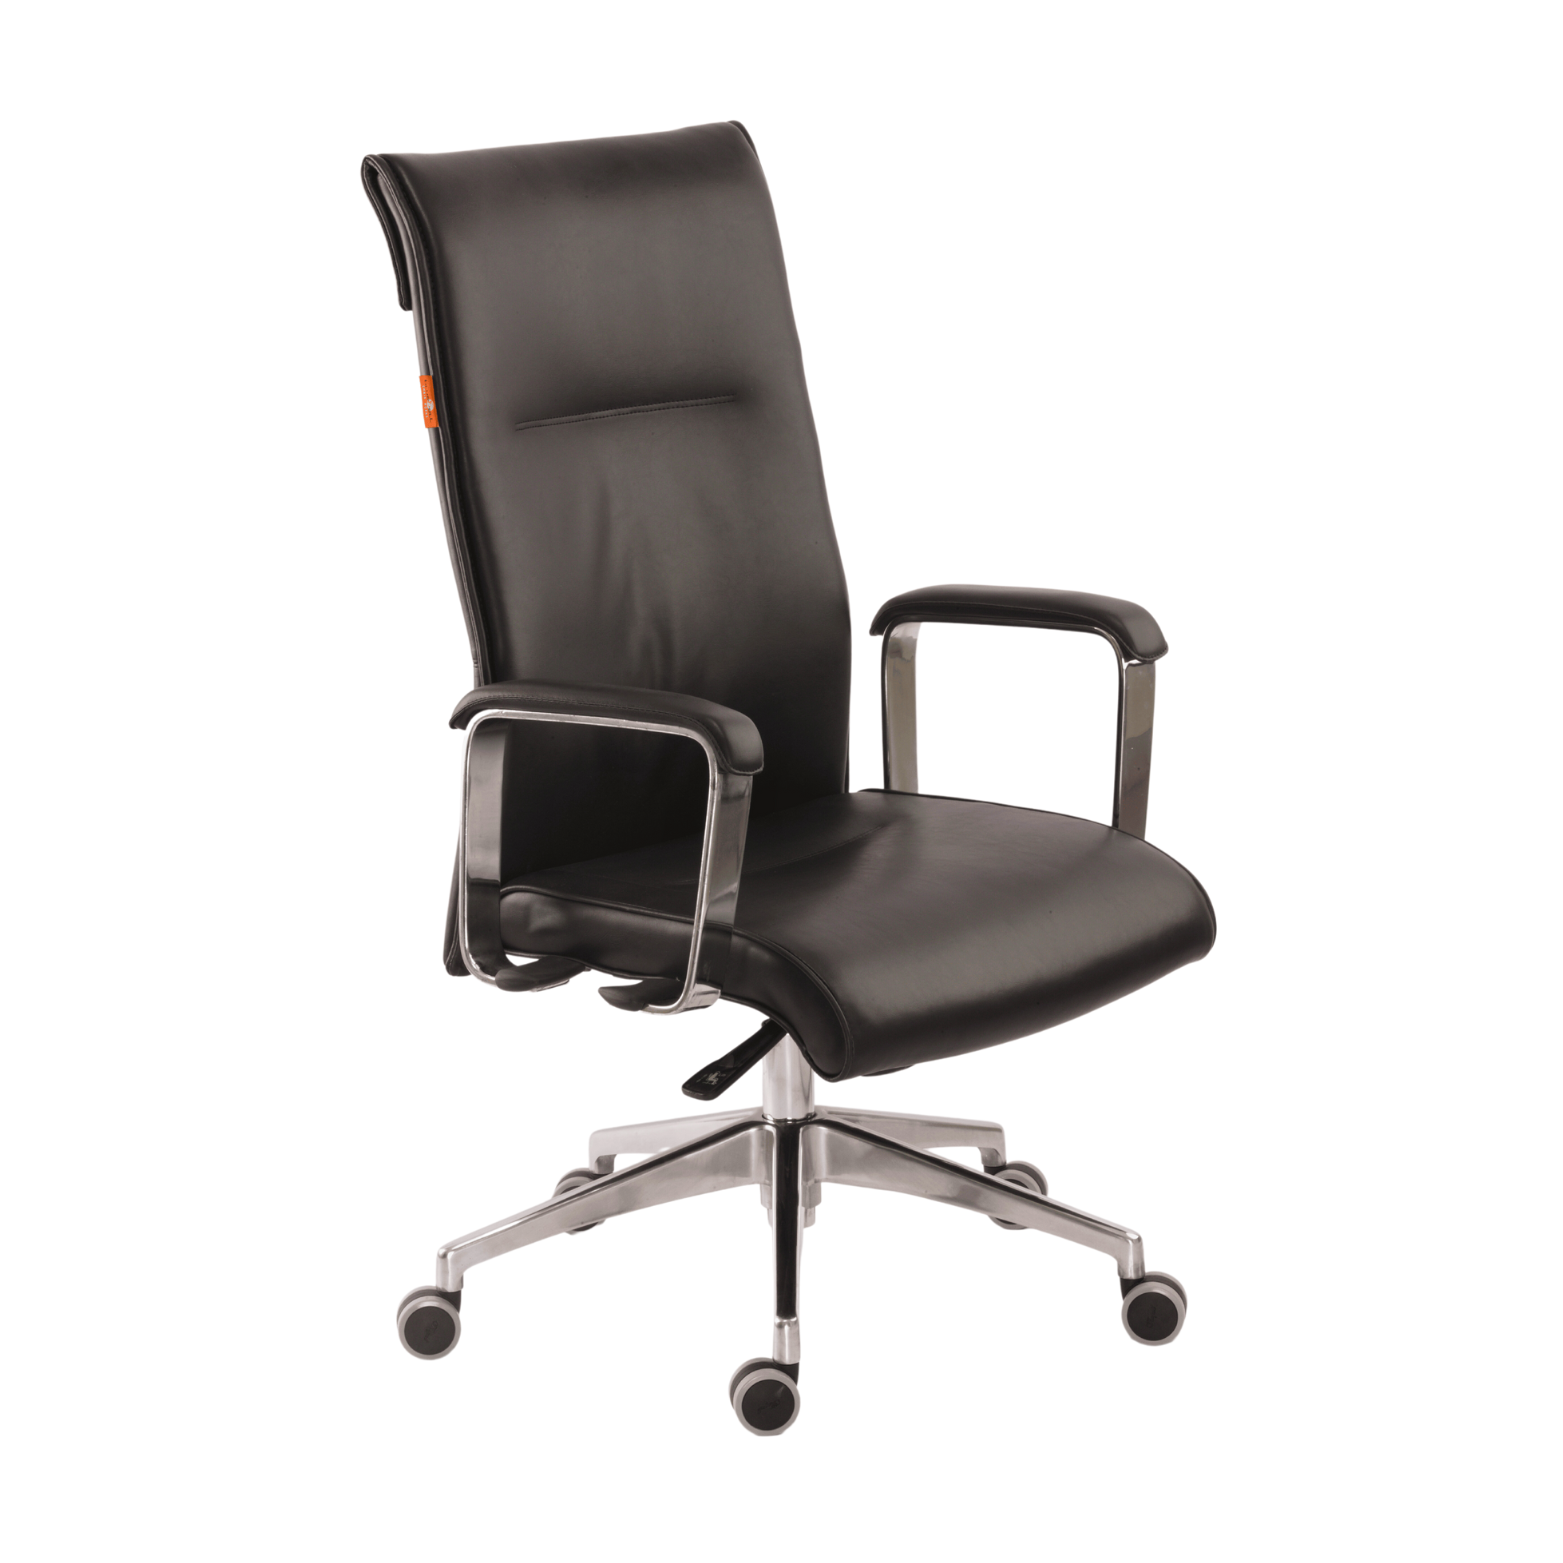 : Concord Premium Super Med Back Revolving Chair (Supreme) - Executive Office Chair with tilting tension adjustment and 360-degree swivel function.